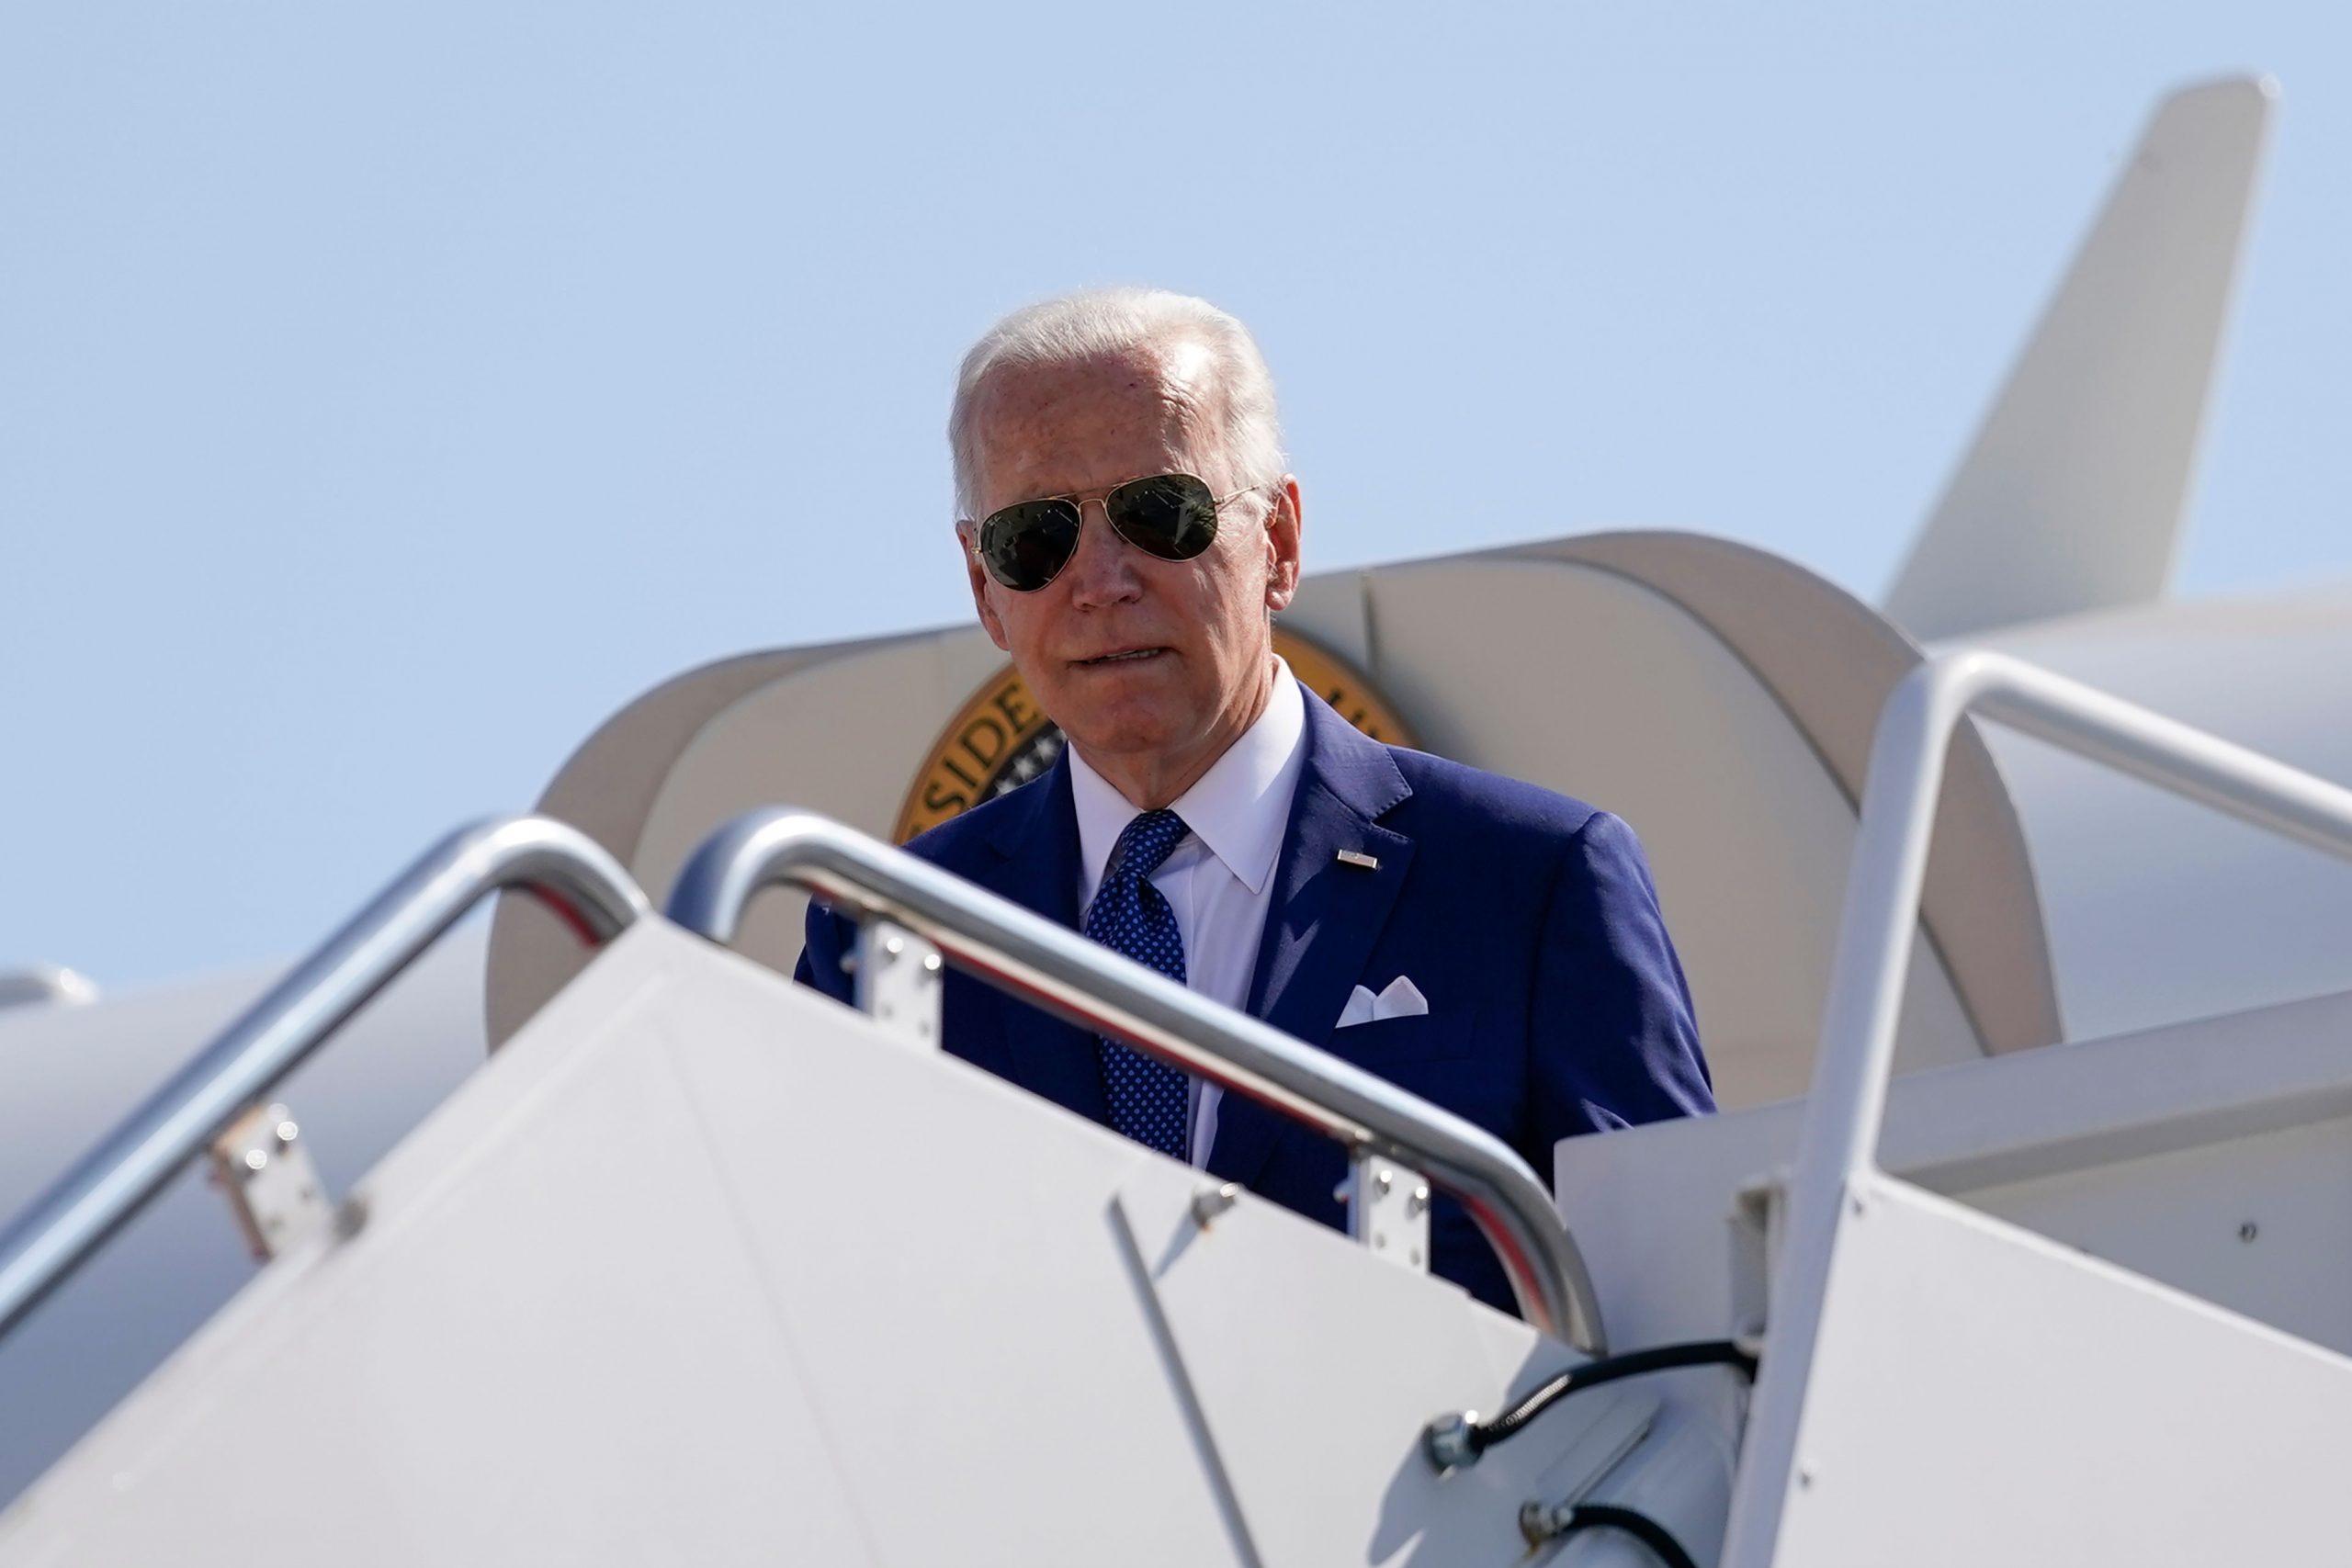 Joe Biden to deliver prime-time speech ahead of US midterms: What to expect